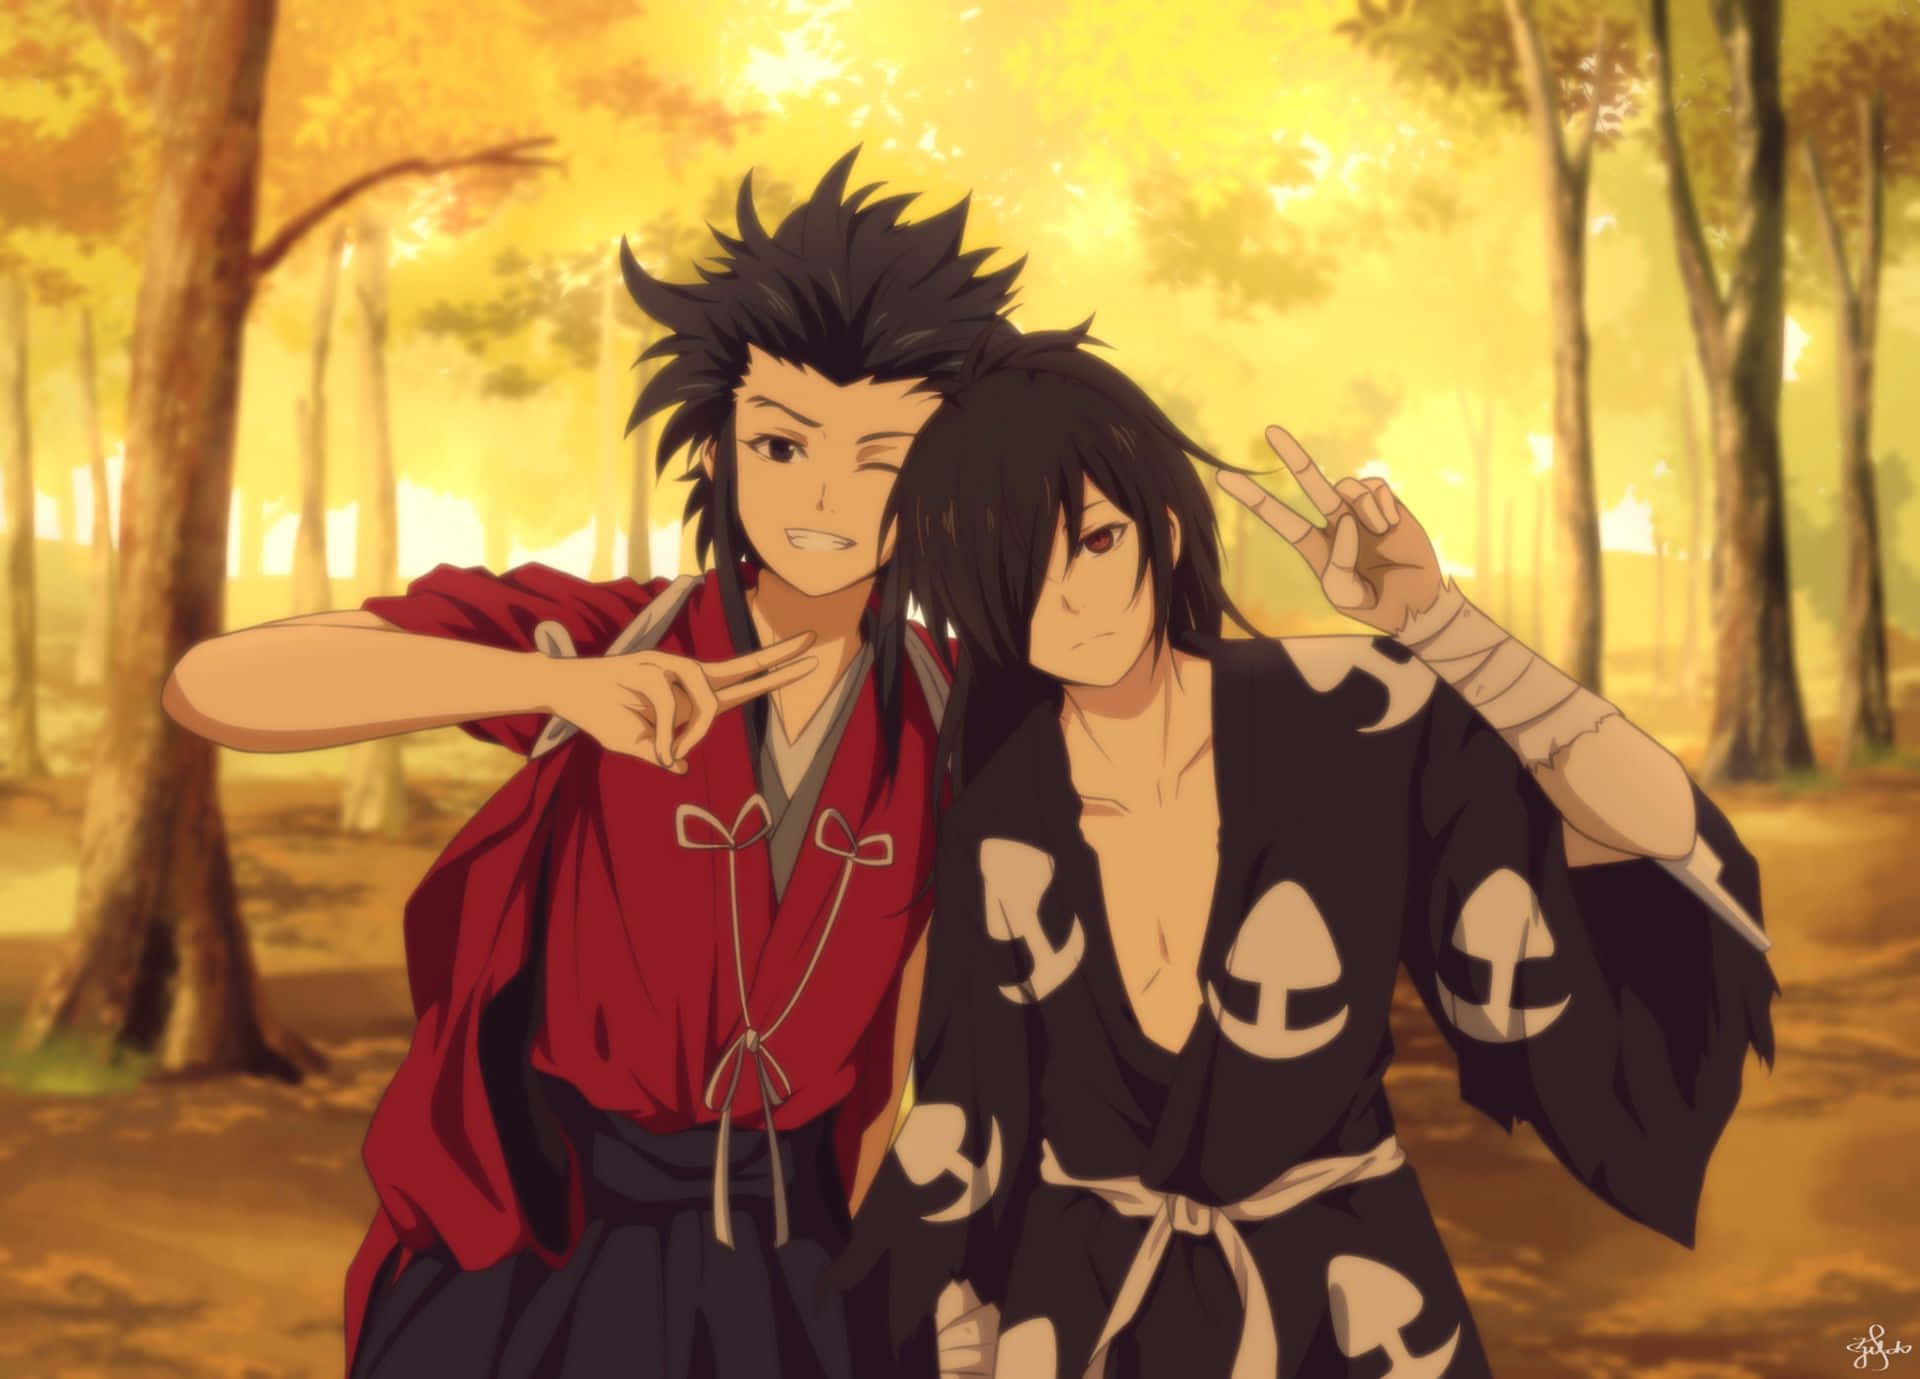 Follow the journey of Hyakkimaru and Dororo as they explore the world together.